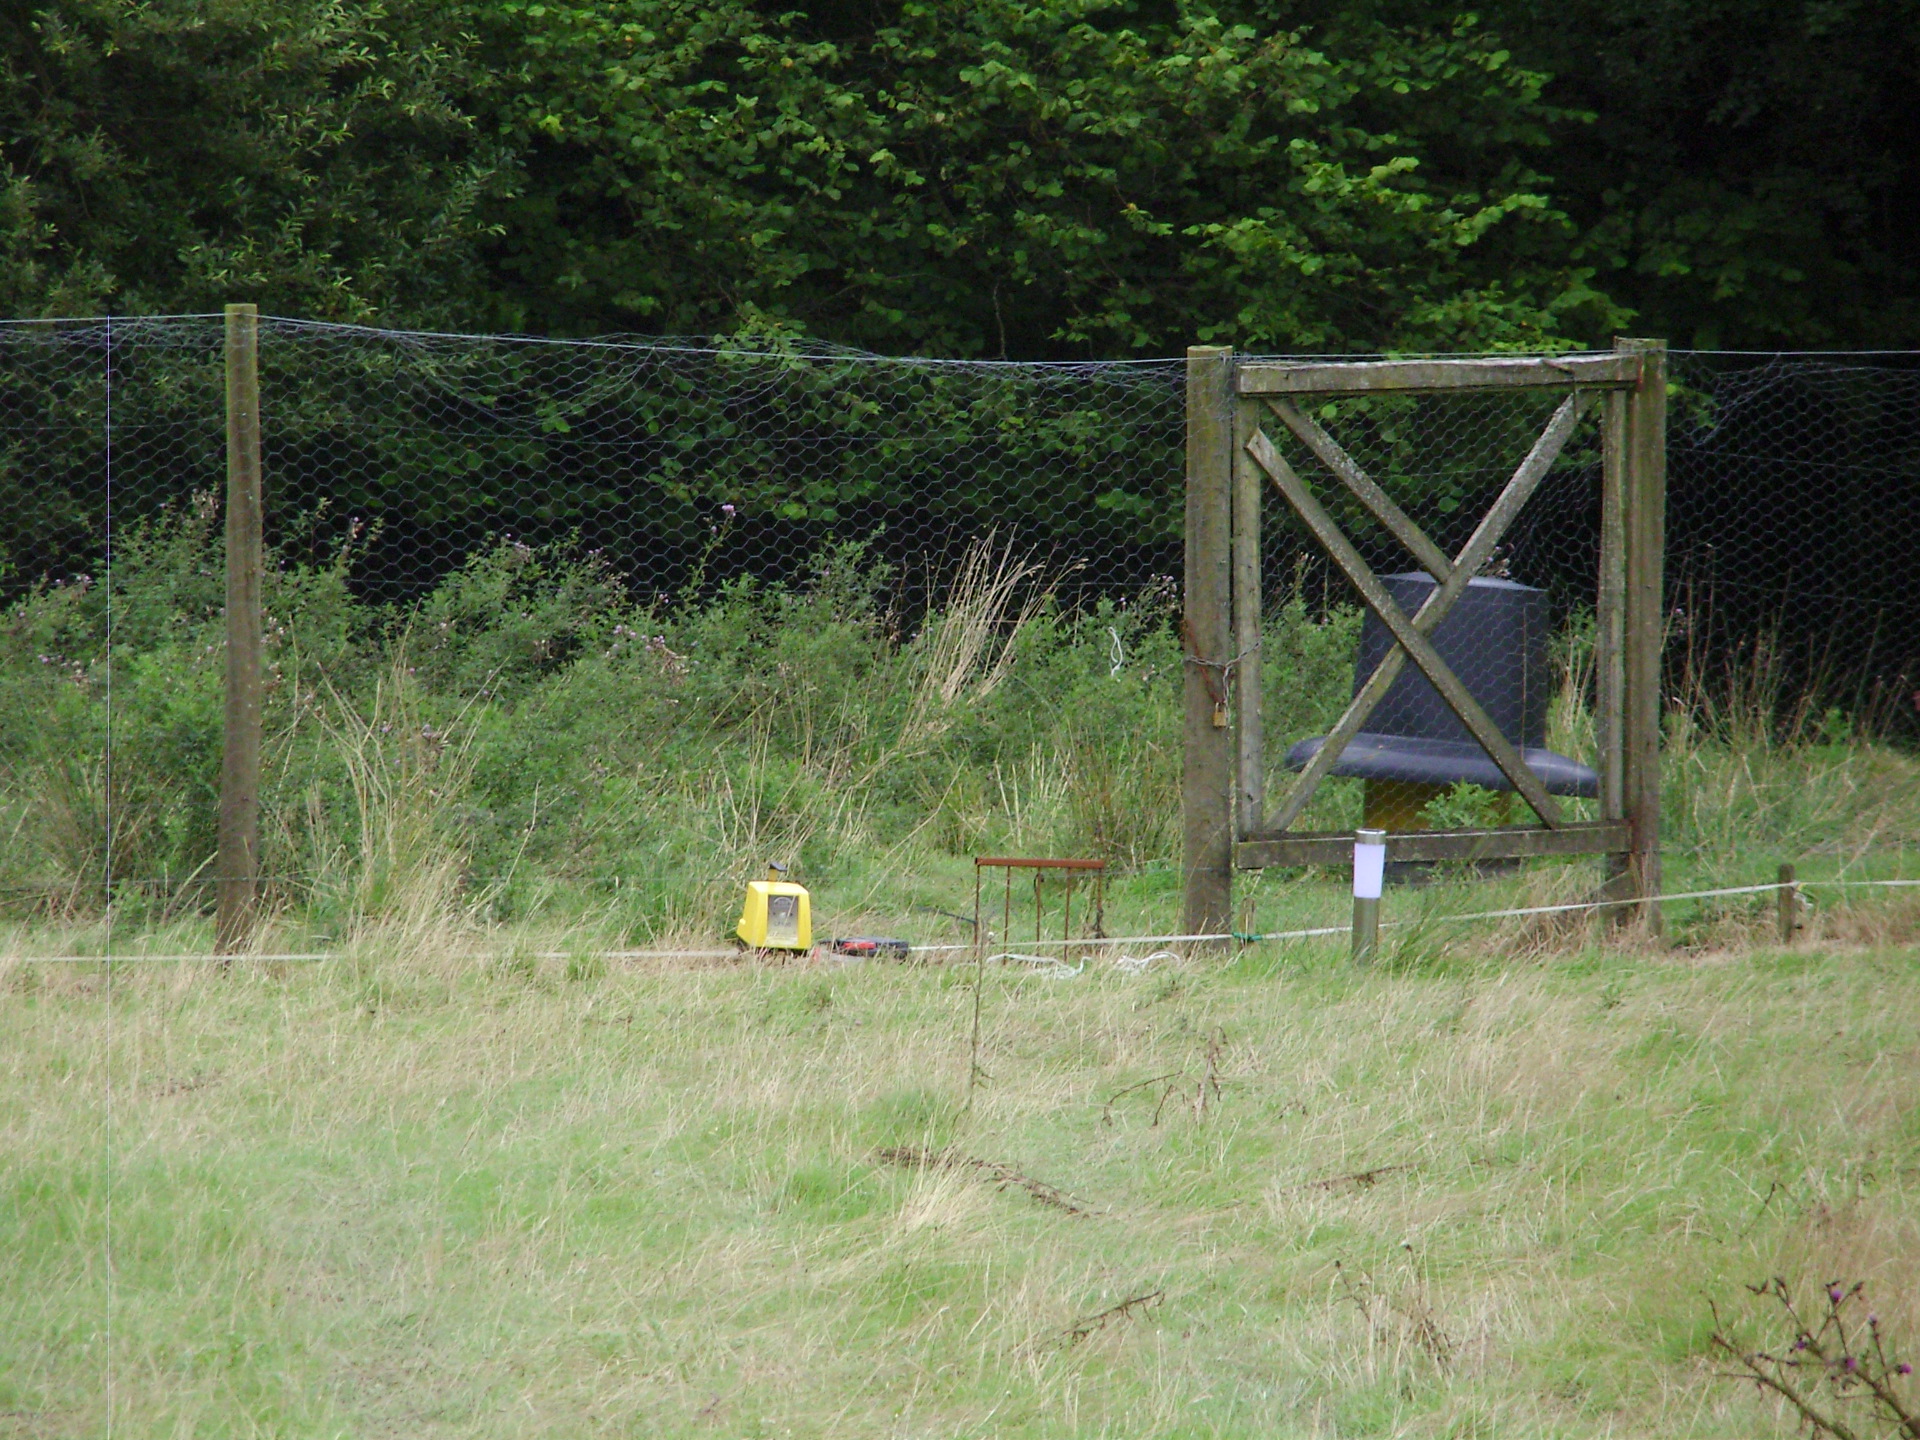 electric fence gives a jolt